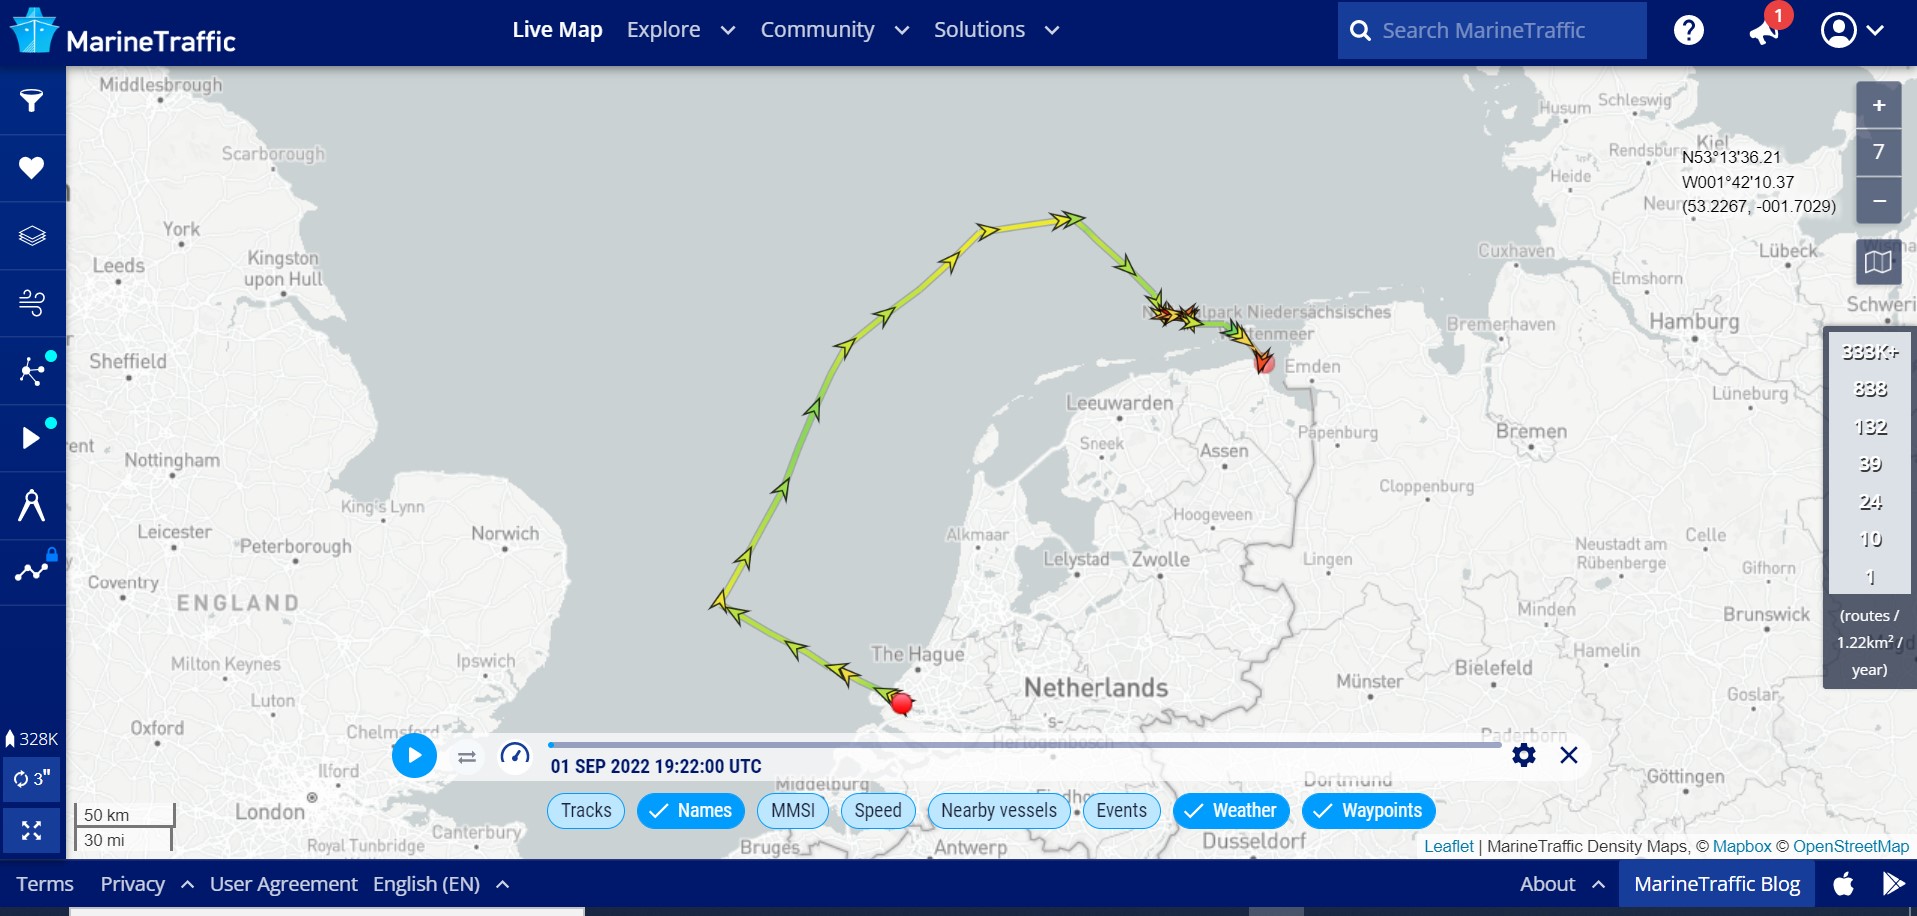 Golar Igloo LNG tanker sailed from Rotterdam to Eemshaven to regas cargoes destined for European pipelines